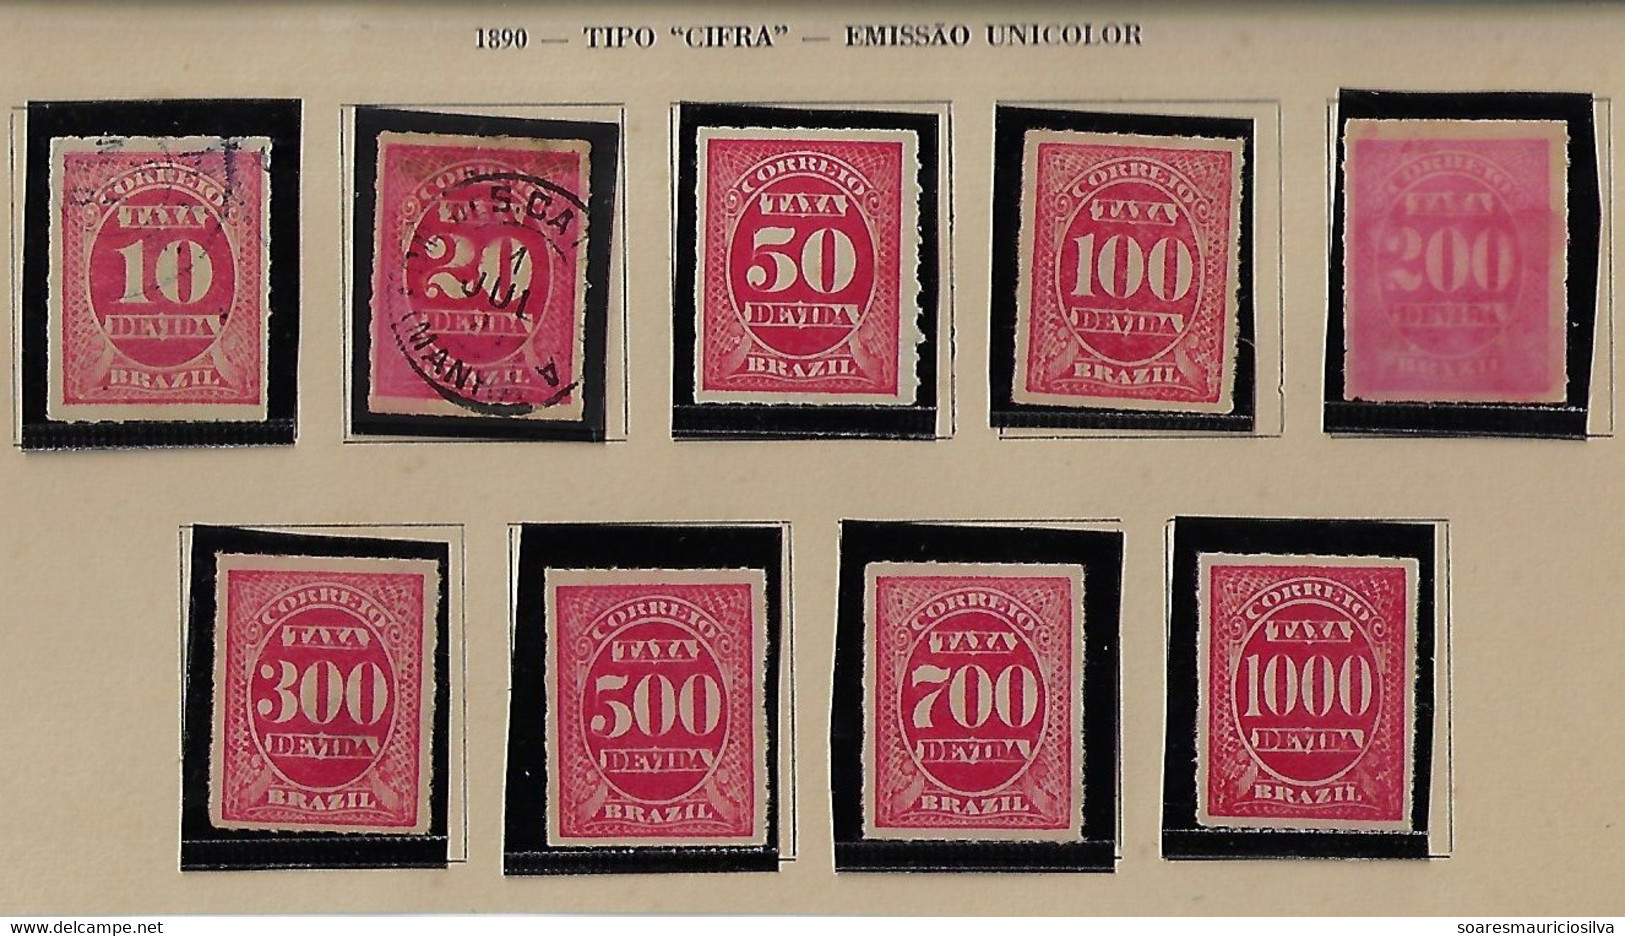 Brazil 1890 Complete Series Postage Due American Bank Note ABN Used And Unused Ink Used In These Stamps Fades In Water - Postage Due